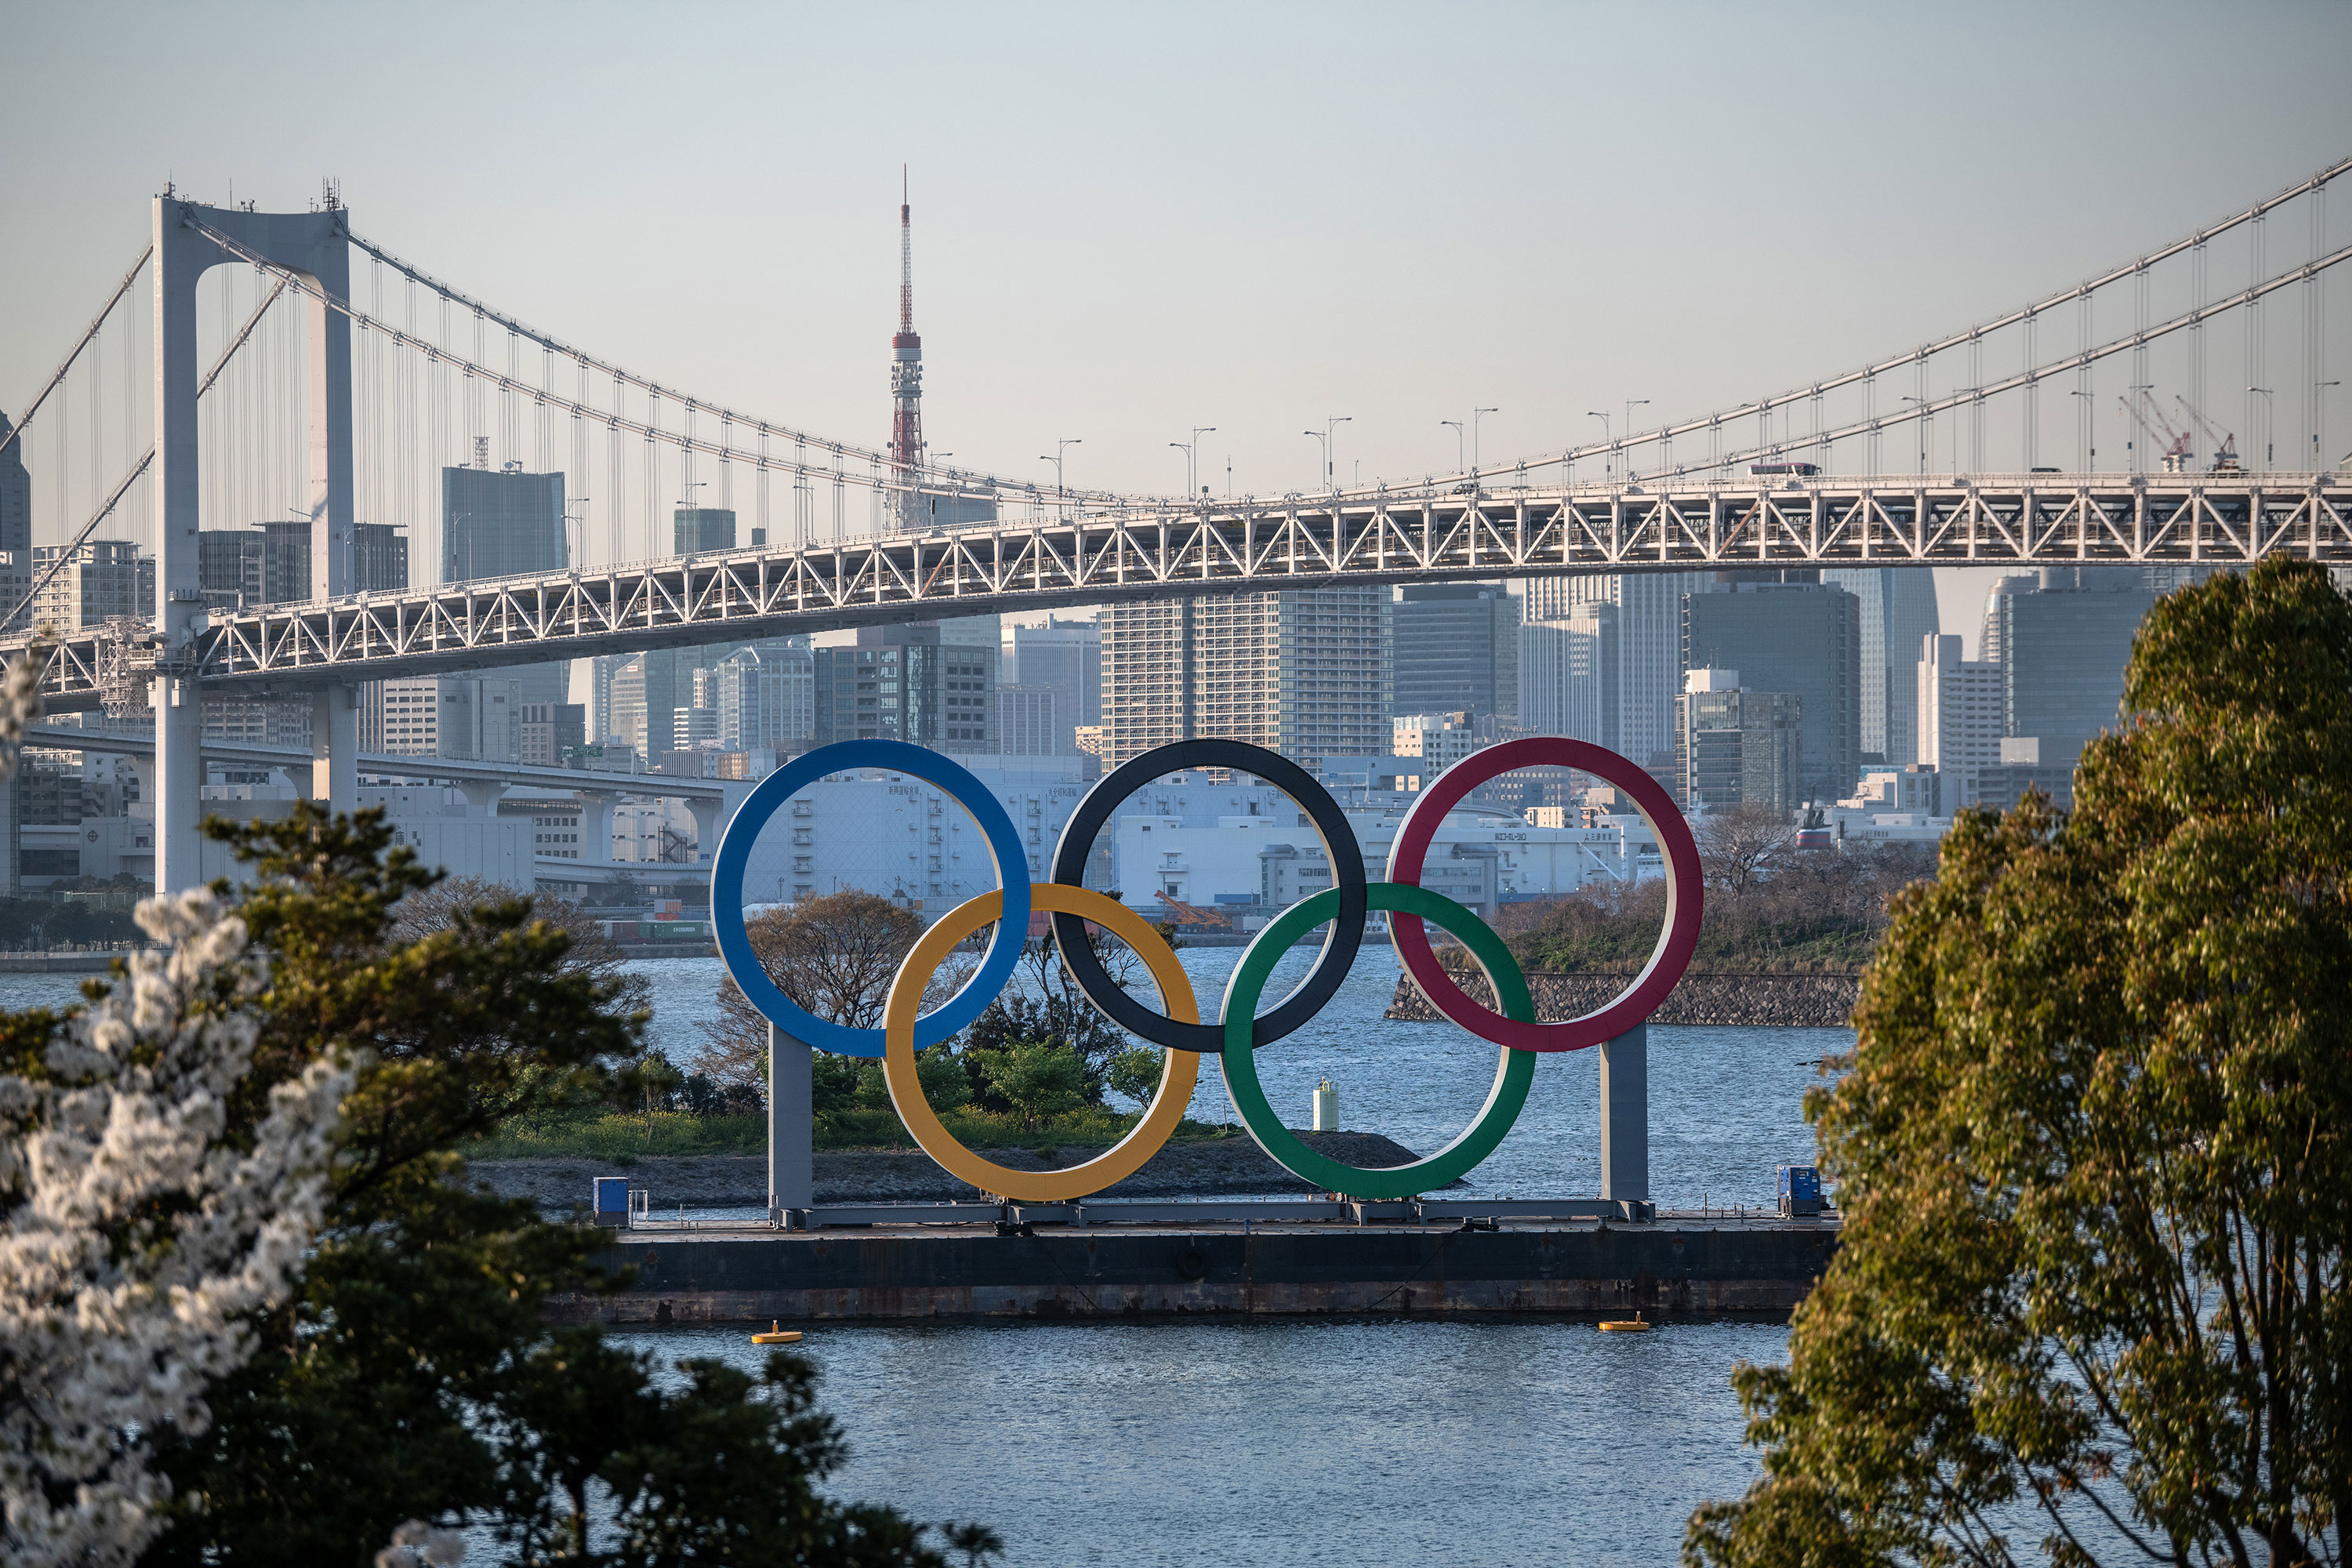 The Tokyo 2020 Olympic Rings are displayed in Tokyo, Japan, on March 25.